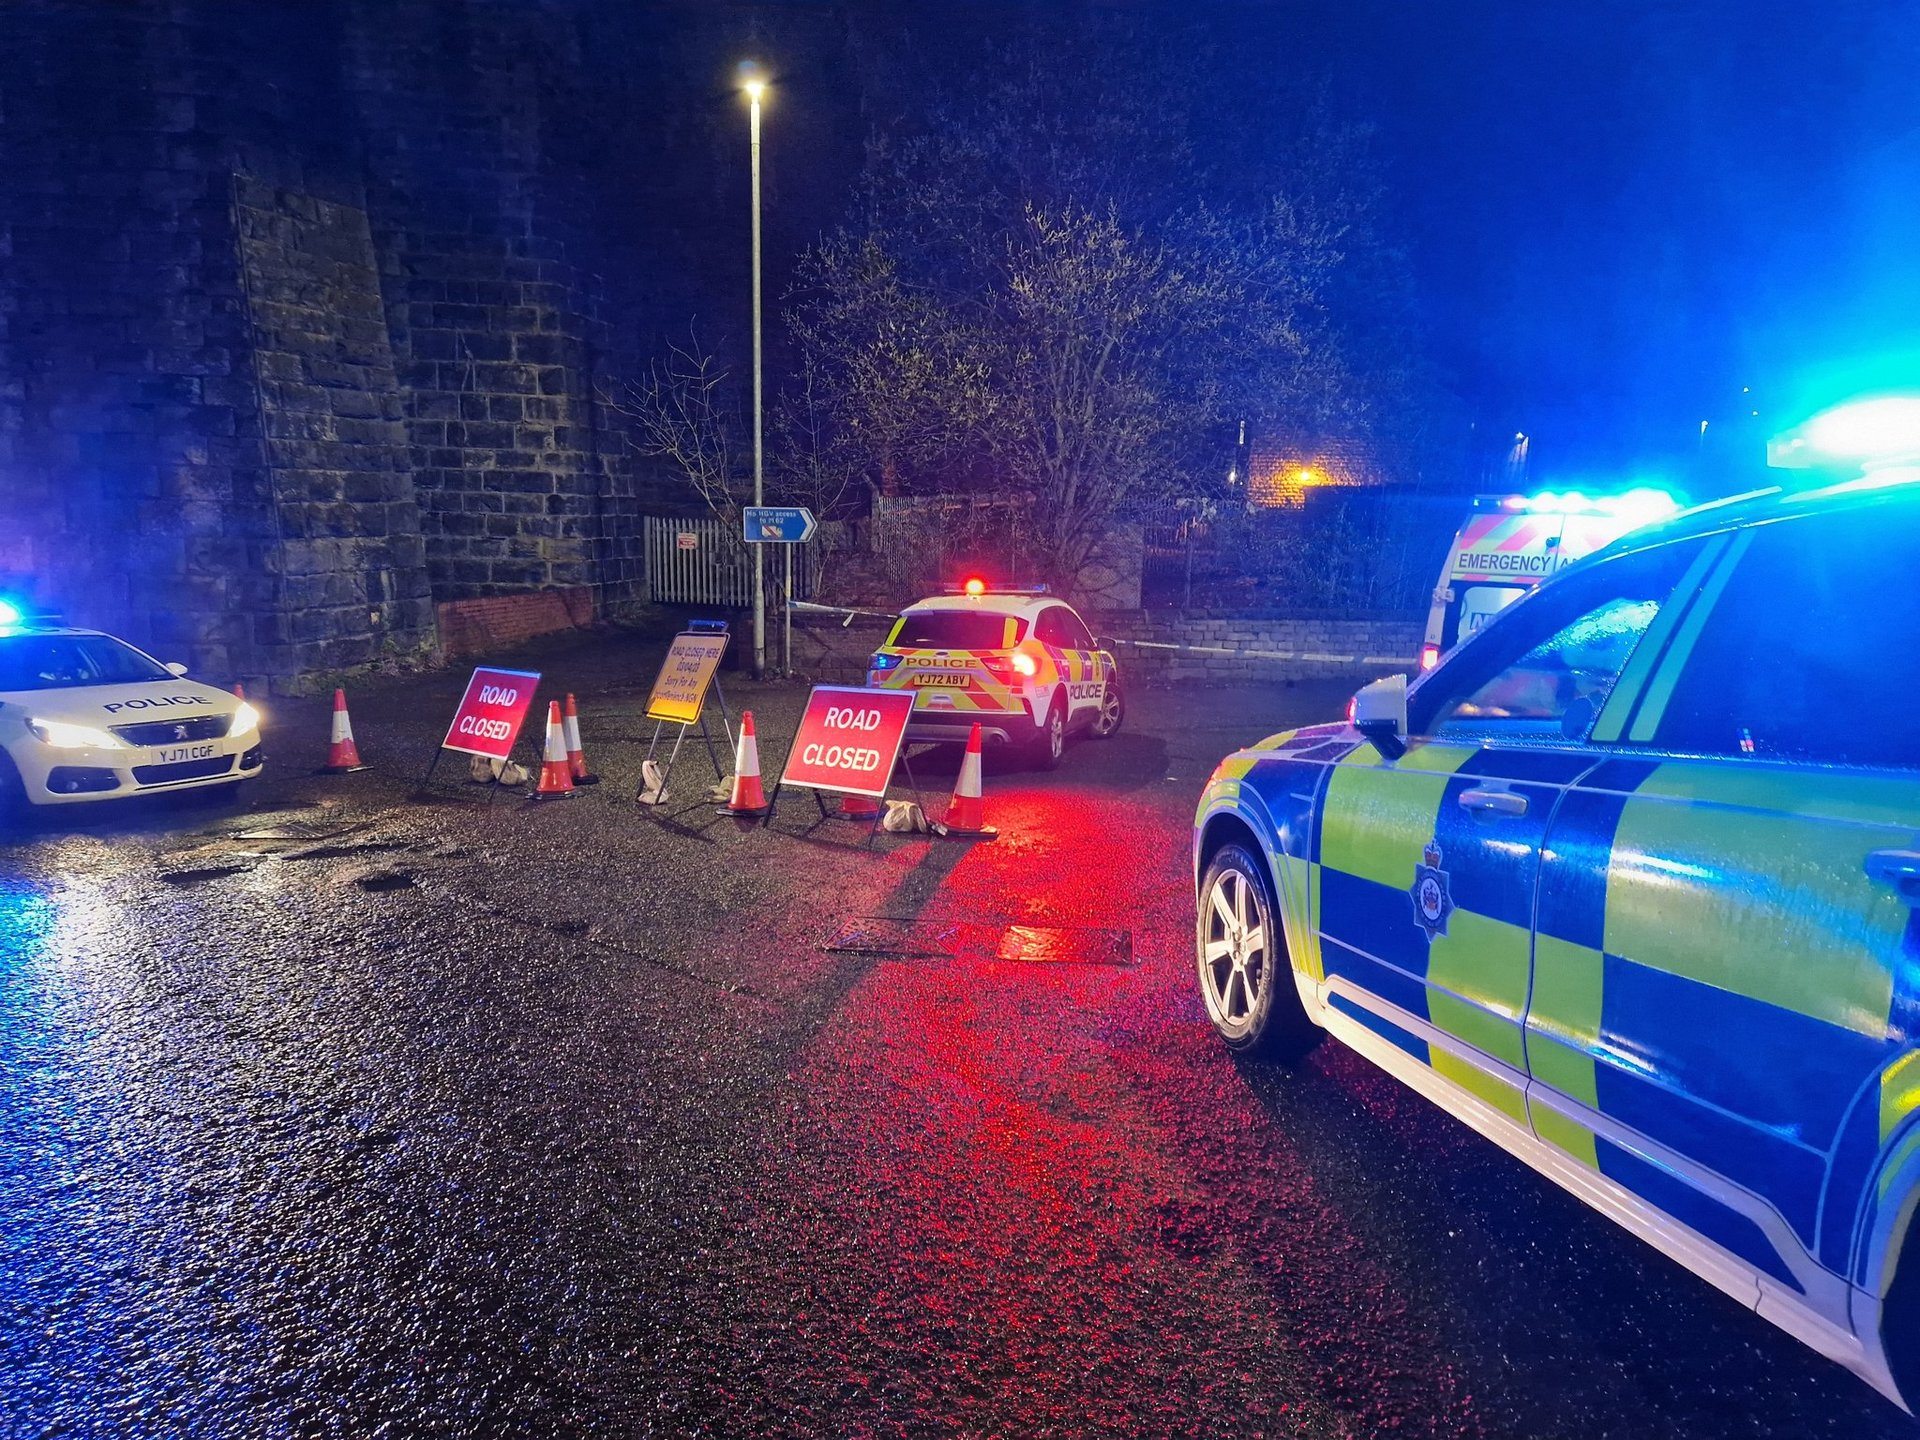 The driver, who only held a provisional licence and had no insurance, was arrested and tested positive for cocaine, West Yorkshire Roads Policing Unit said.